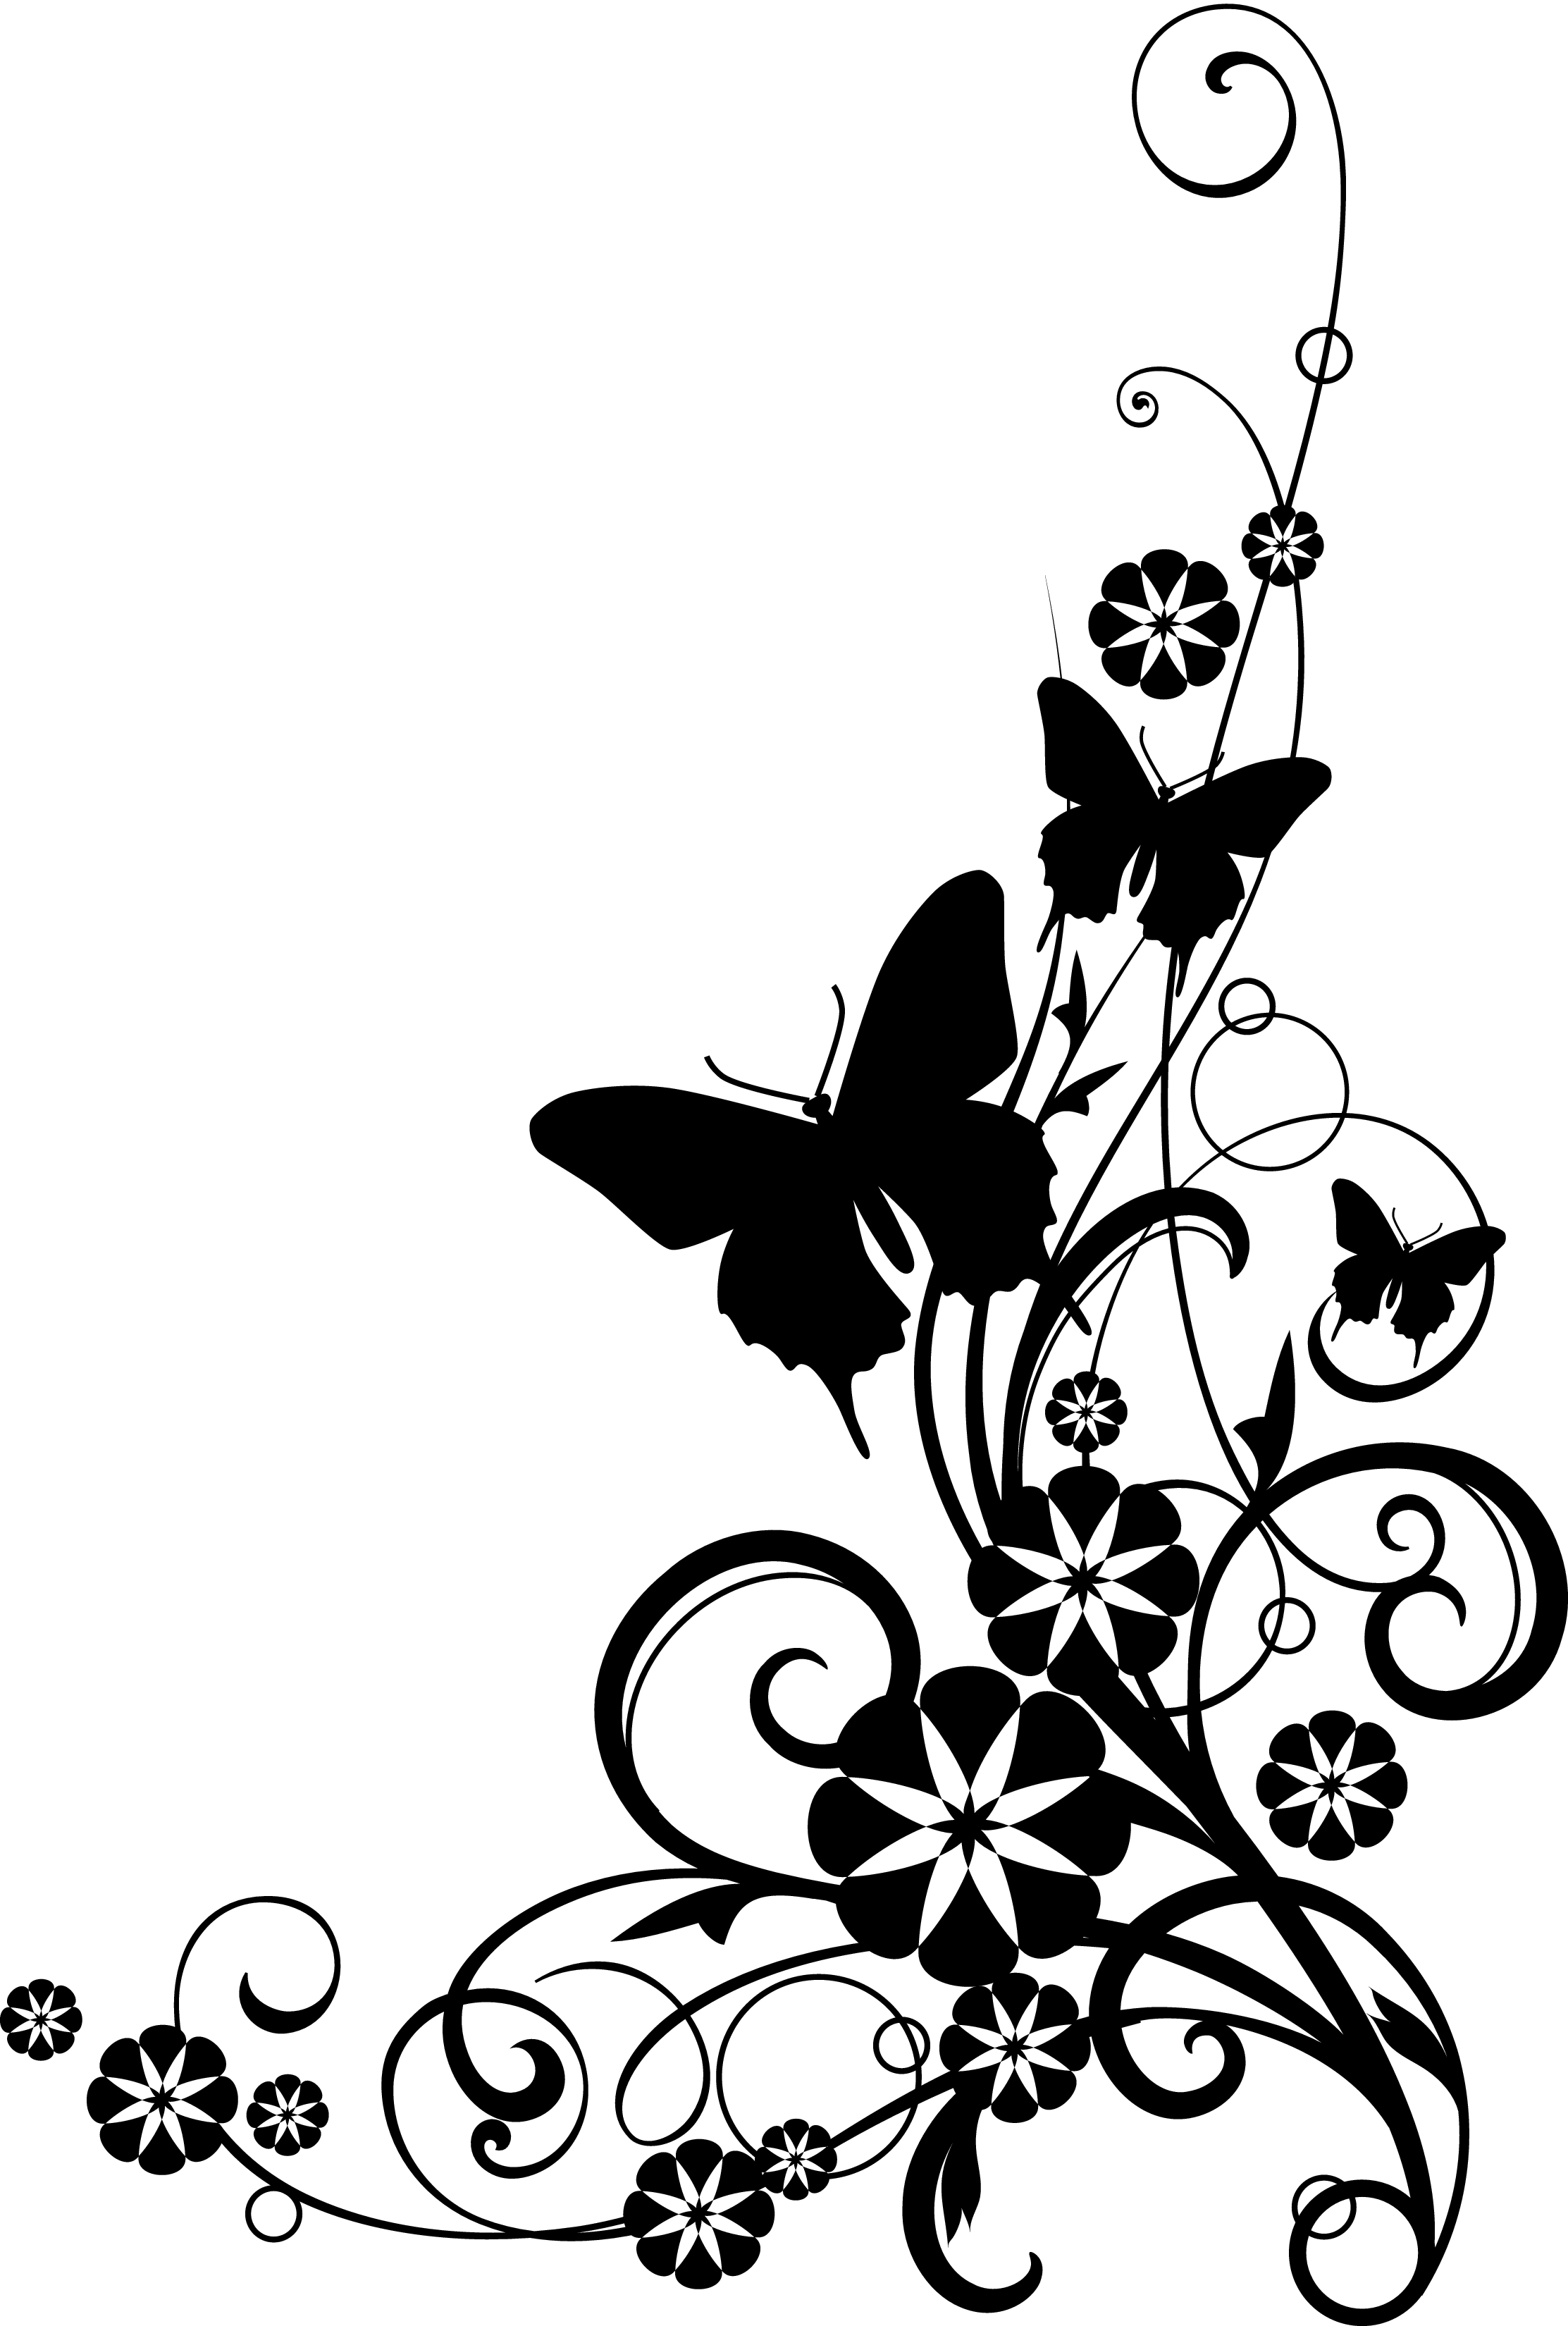 Black And White Flower Border Clipart Png Transparent Background Free Download 41803 Freeiconspng